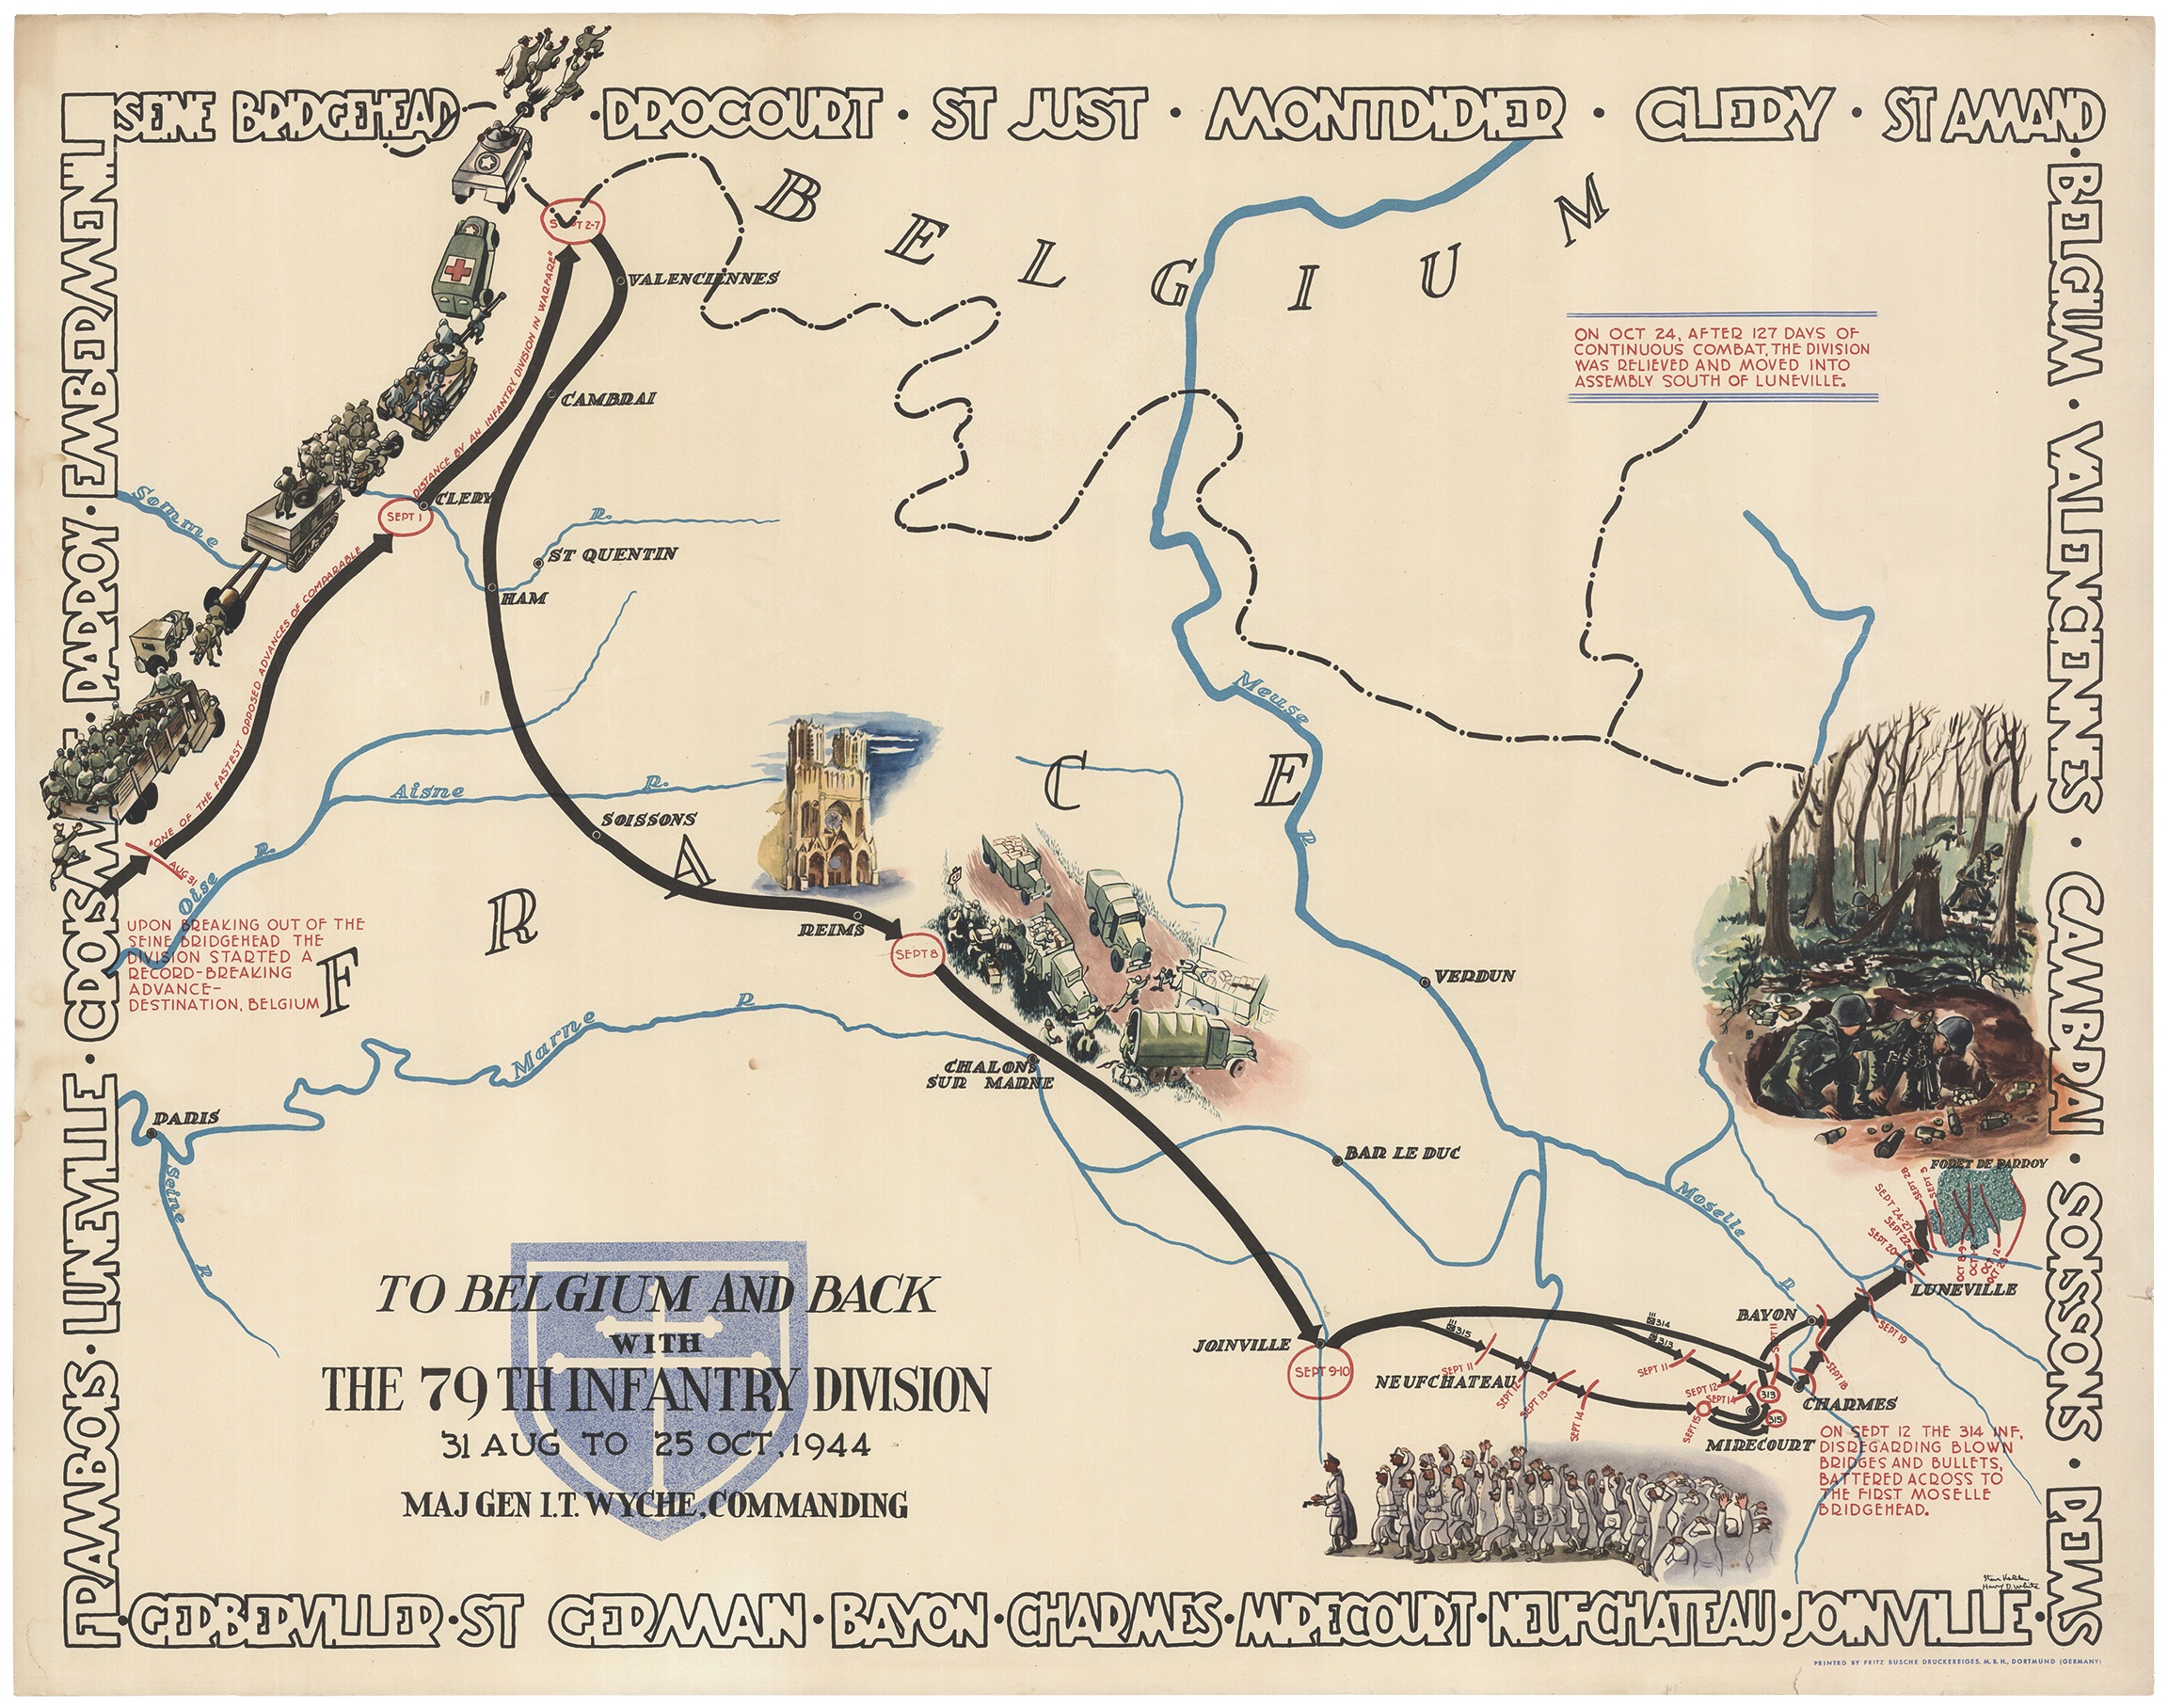 “To Belgium and Back” (August 31–October 25, 1944). After crossing the Seine, the 79th Division embarked on a breakneck advance into Belgium and then through the rest of France, for 127 continuous days of combat. (David Rumsey Historical Map Collection)